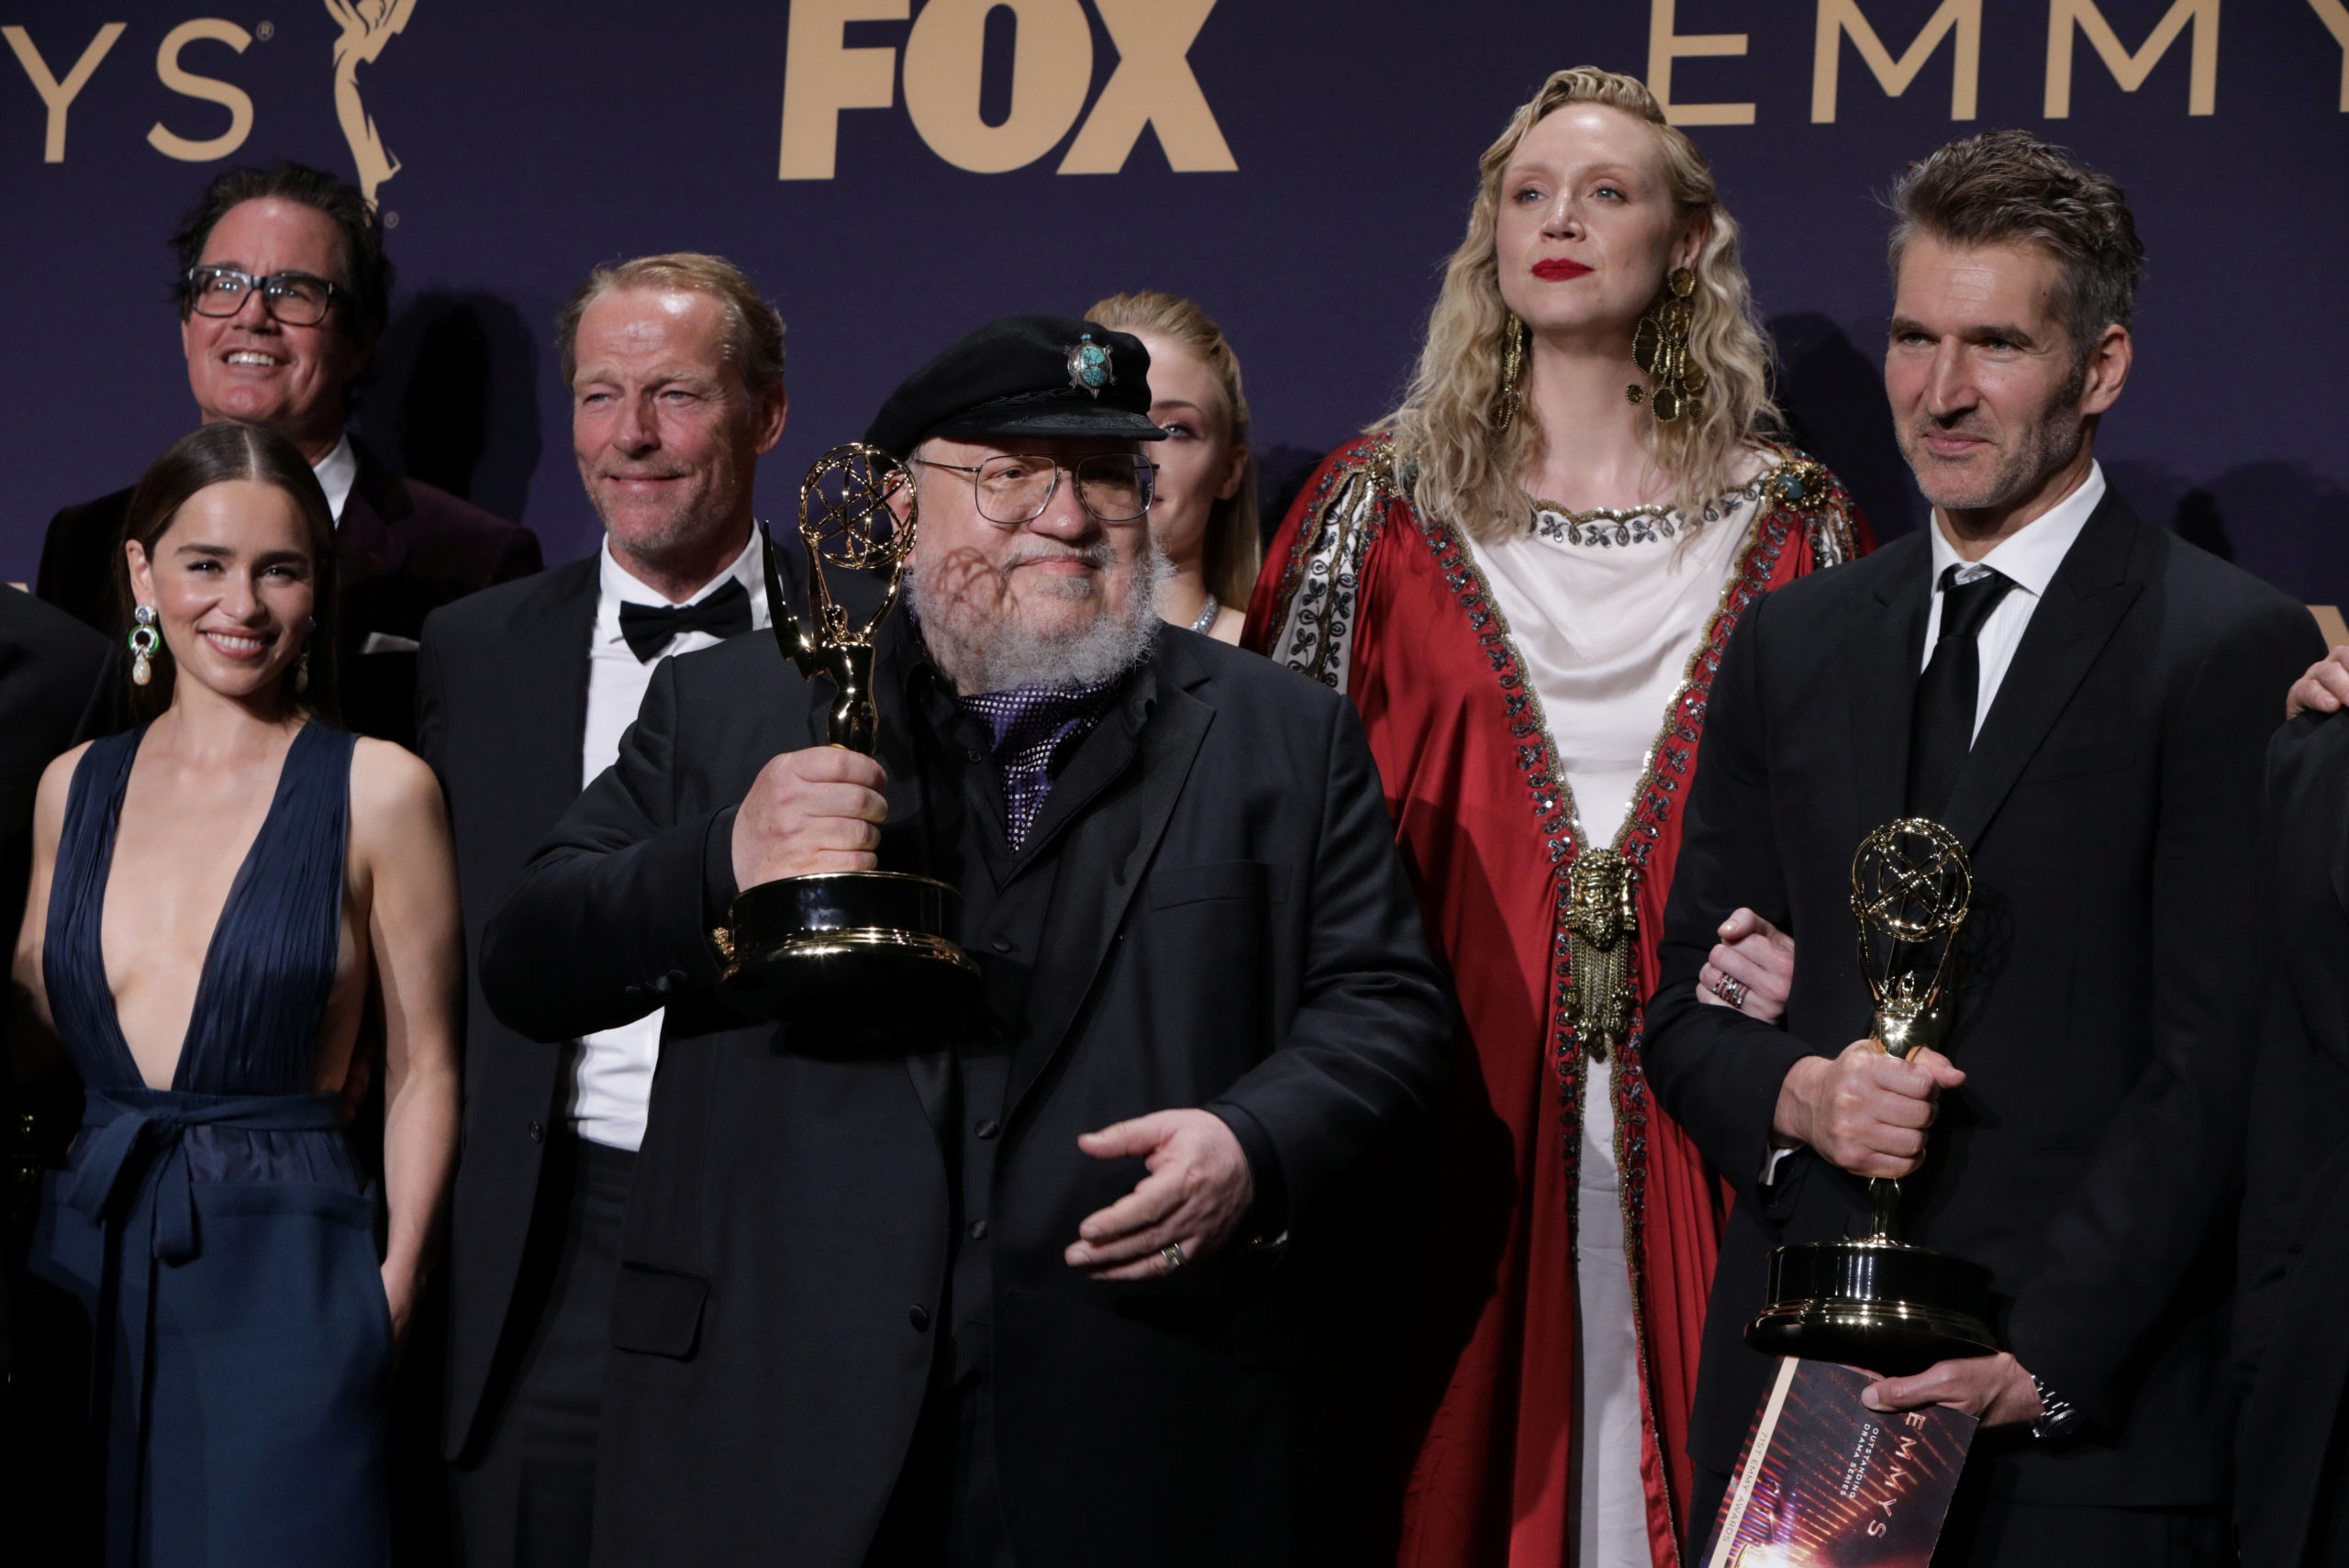 71st Primetime Emmy Awards - Photo Room – Los Angeles, California, U.S., September 22, 2019 - George R.R. Martin (C) and the cast and crew of Game of Thrones poses backstage with their award for Outstanding Drama Series. 